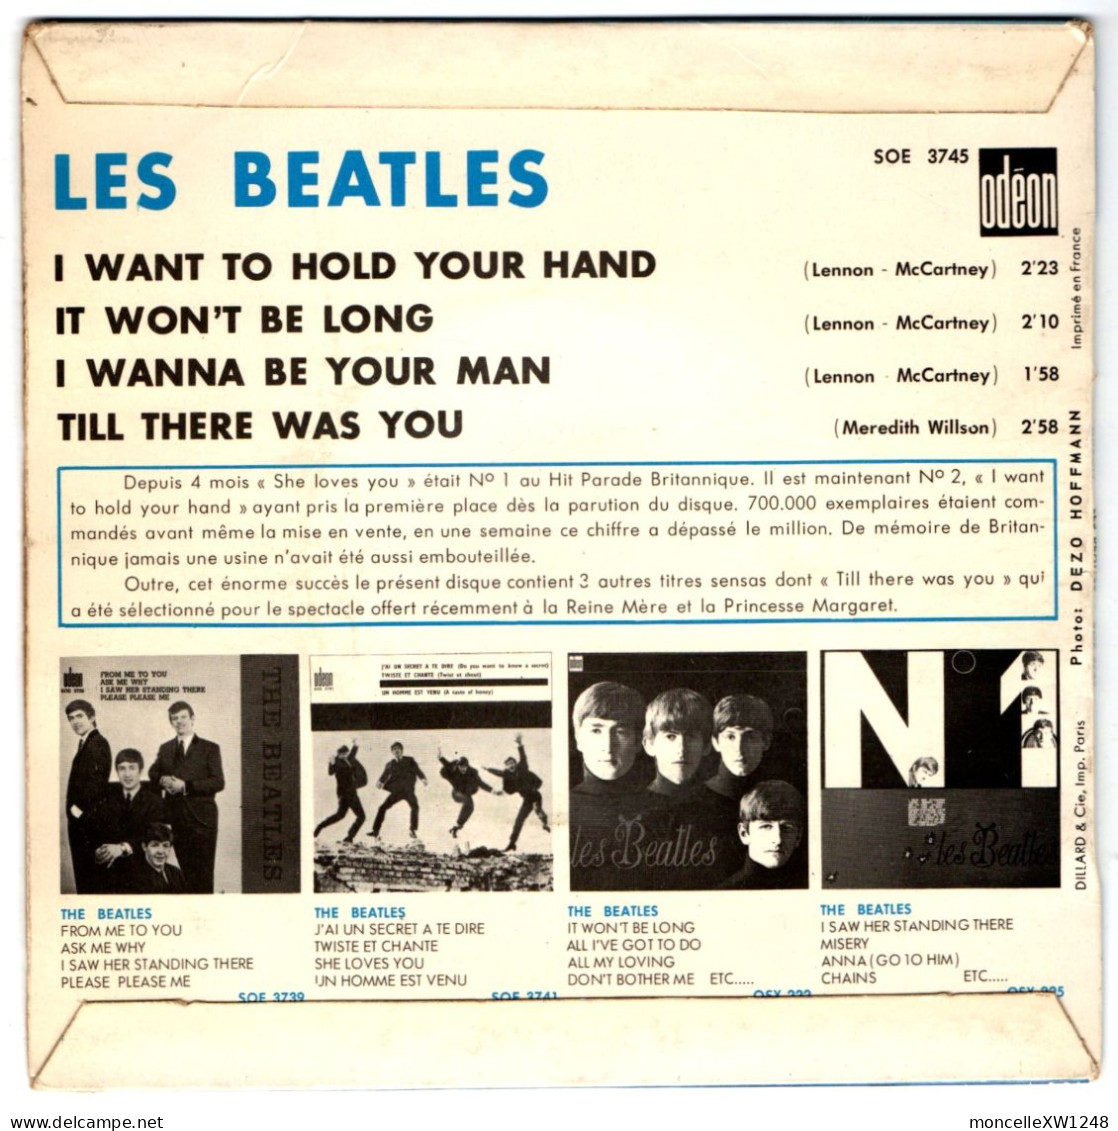 Les Beatles - 45 T EP I Want To Hold Your Hand (1964) - 45 T - Maxi-Single